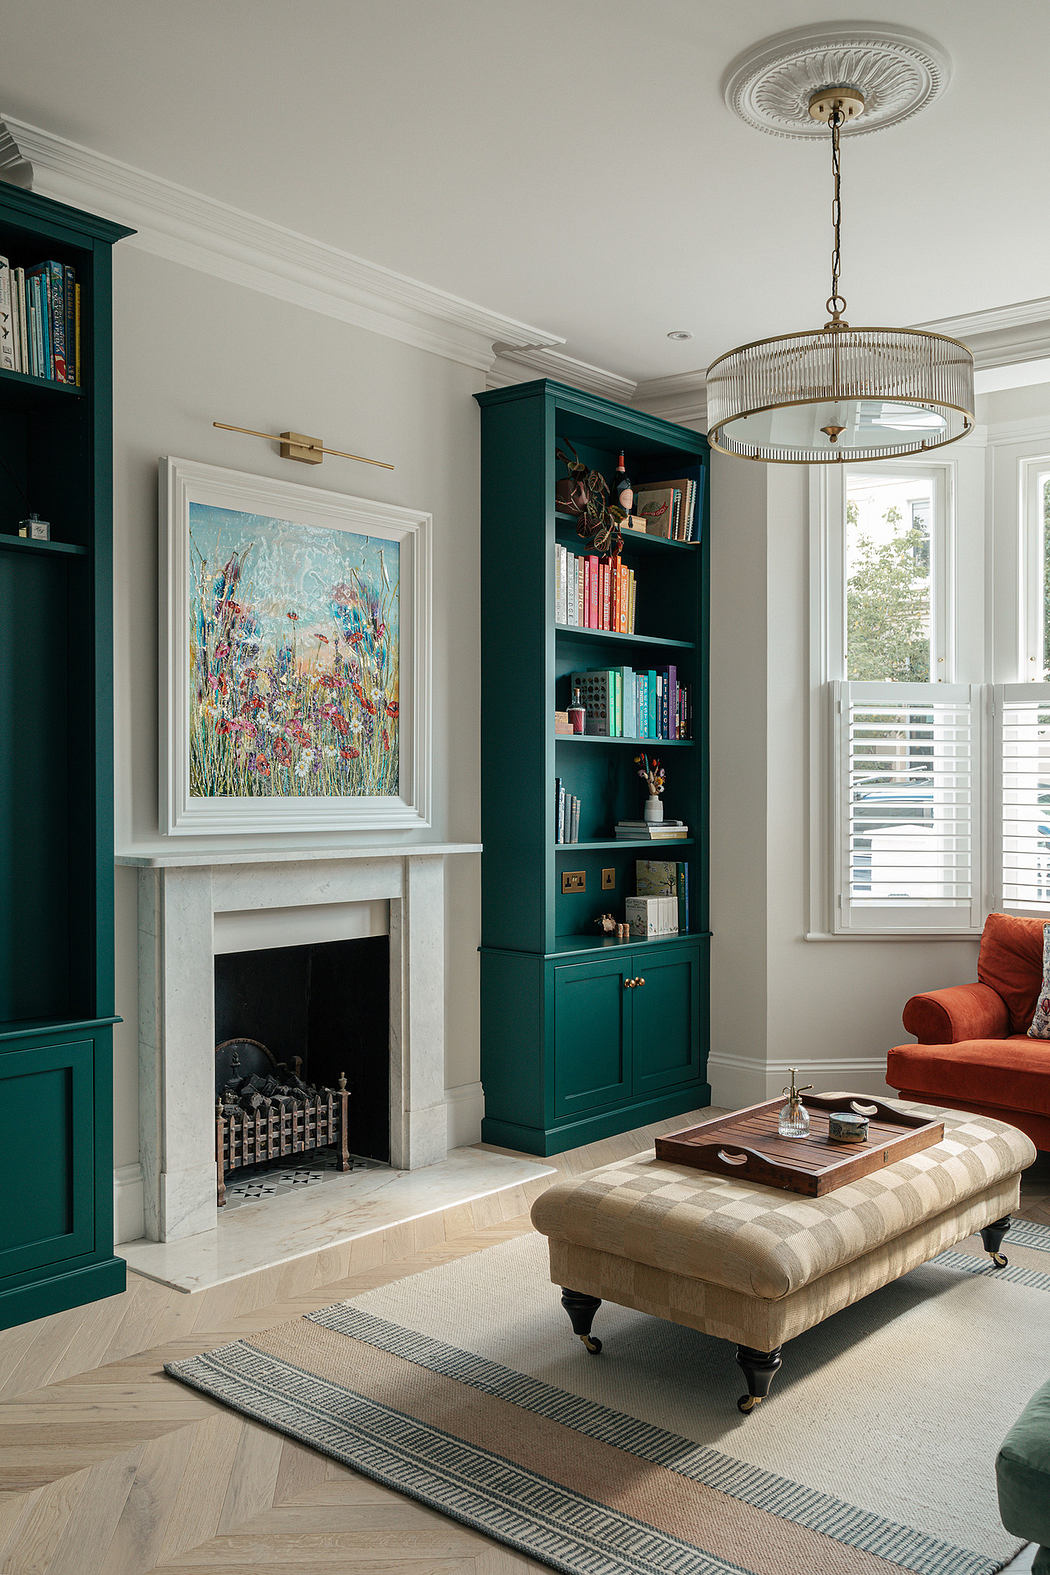 Elegant living room with teal bookcases, a fireplace, and a chandelier